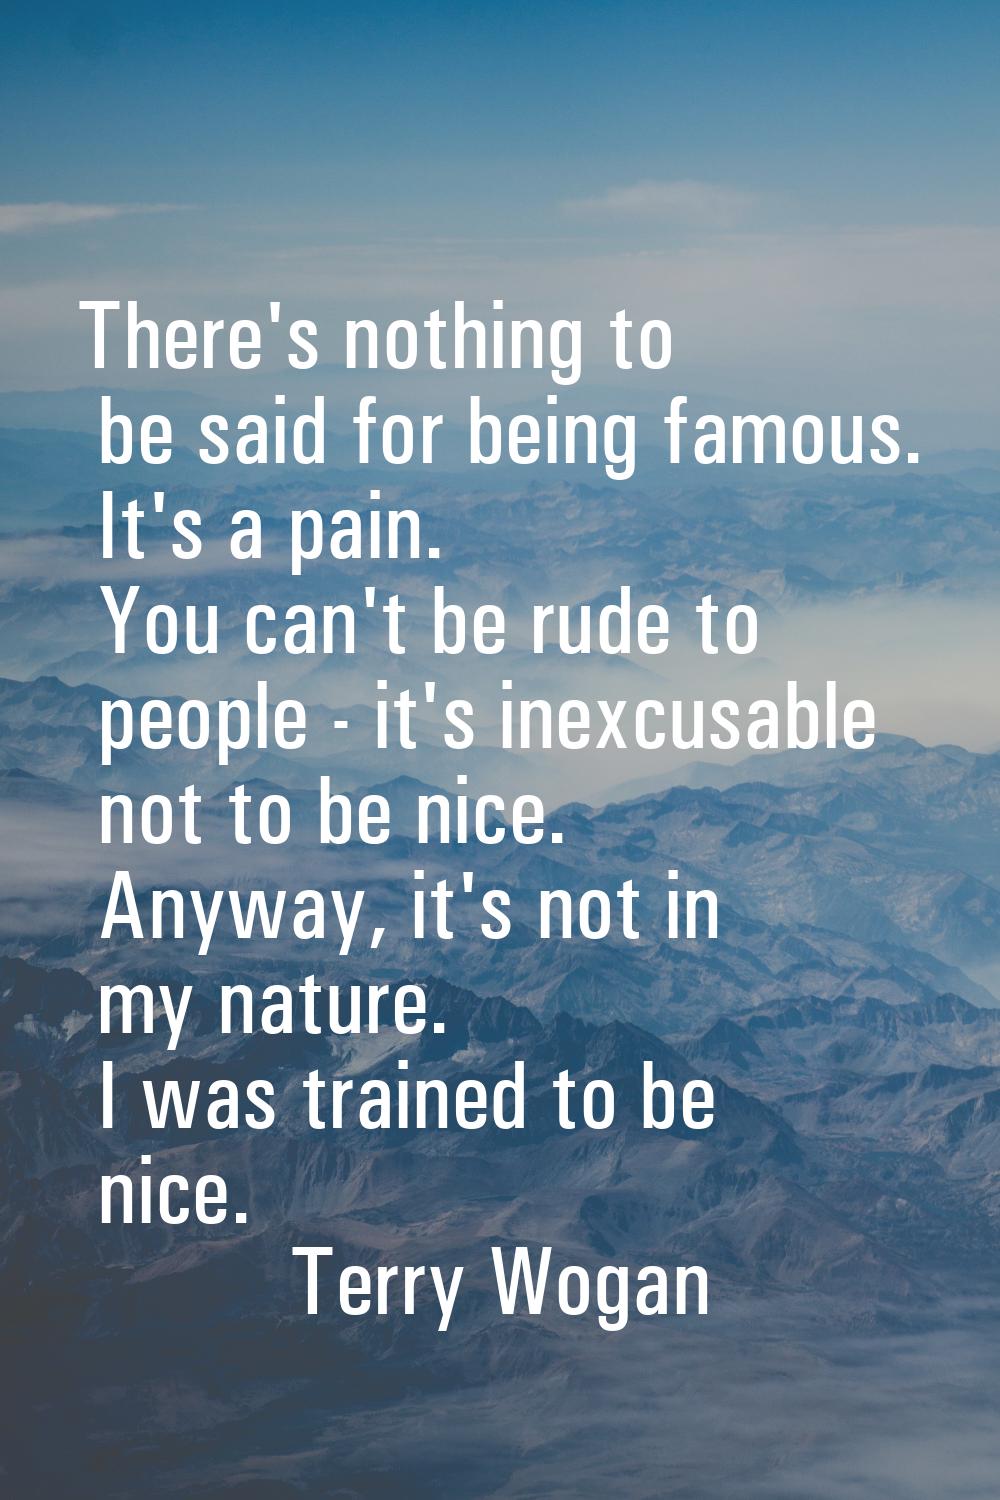 There's nothing to be said for being famous. It's a pain. You can't be rude to people - it's inexcu